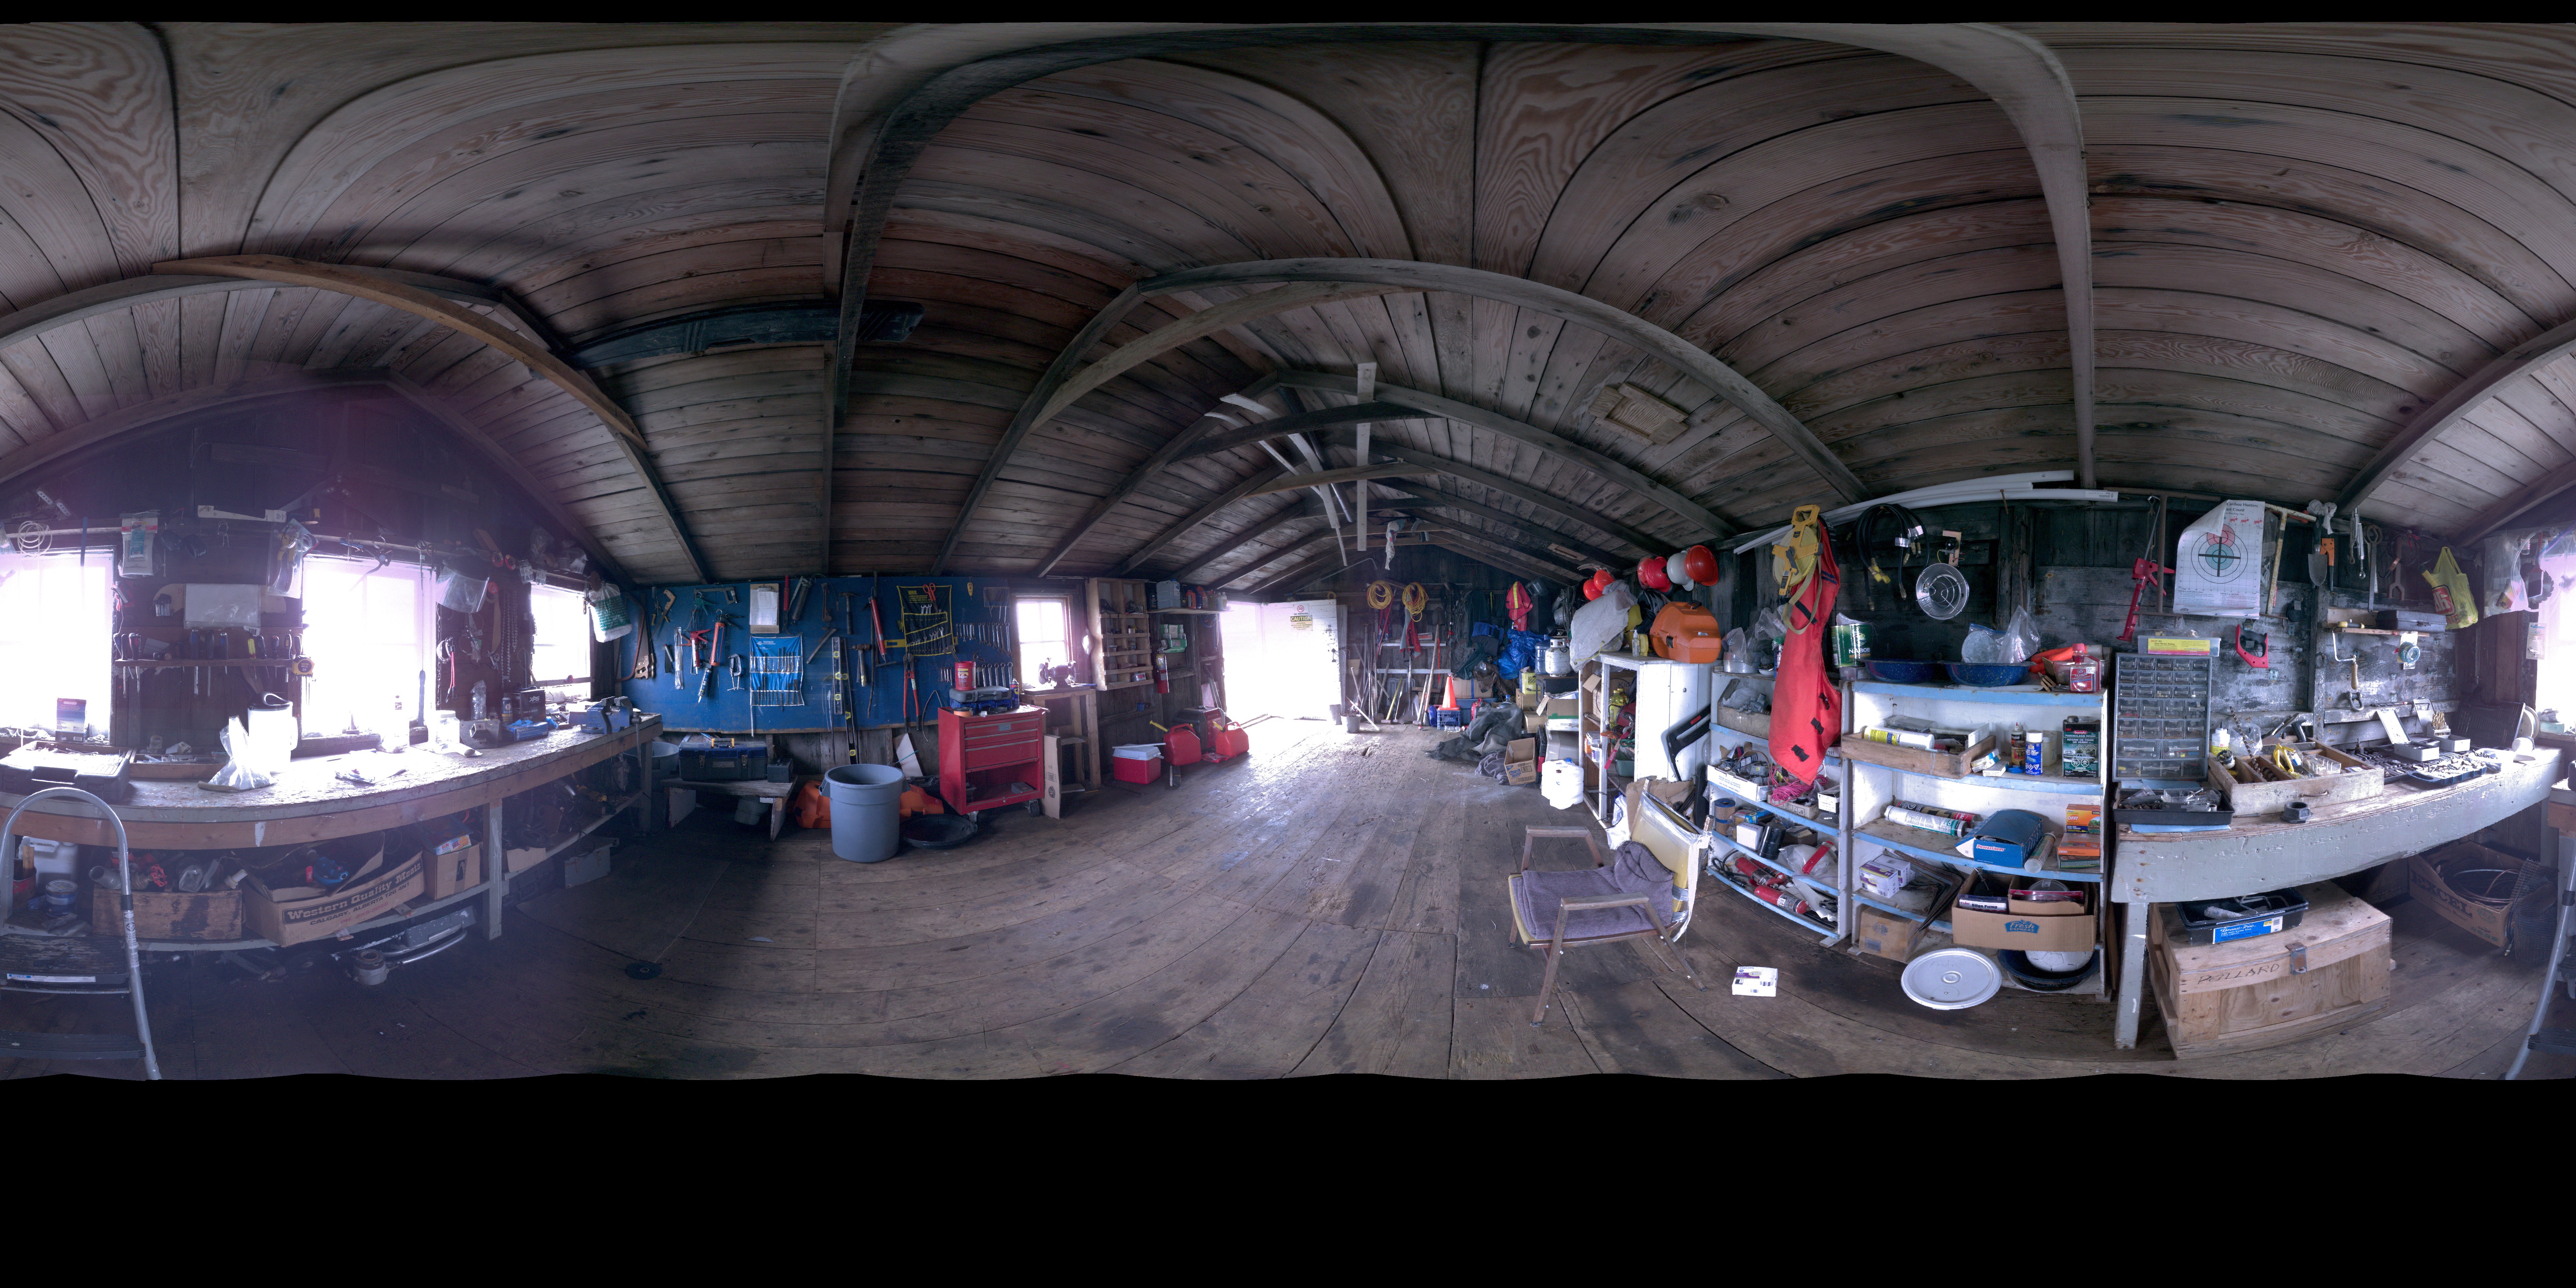 Panoramic view of the interior of the Blubber House from scanning location 2